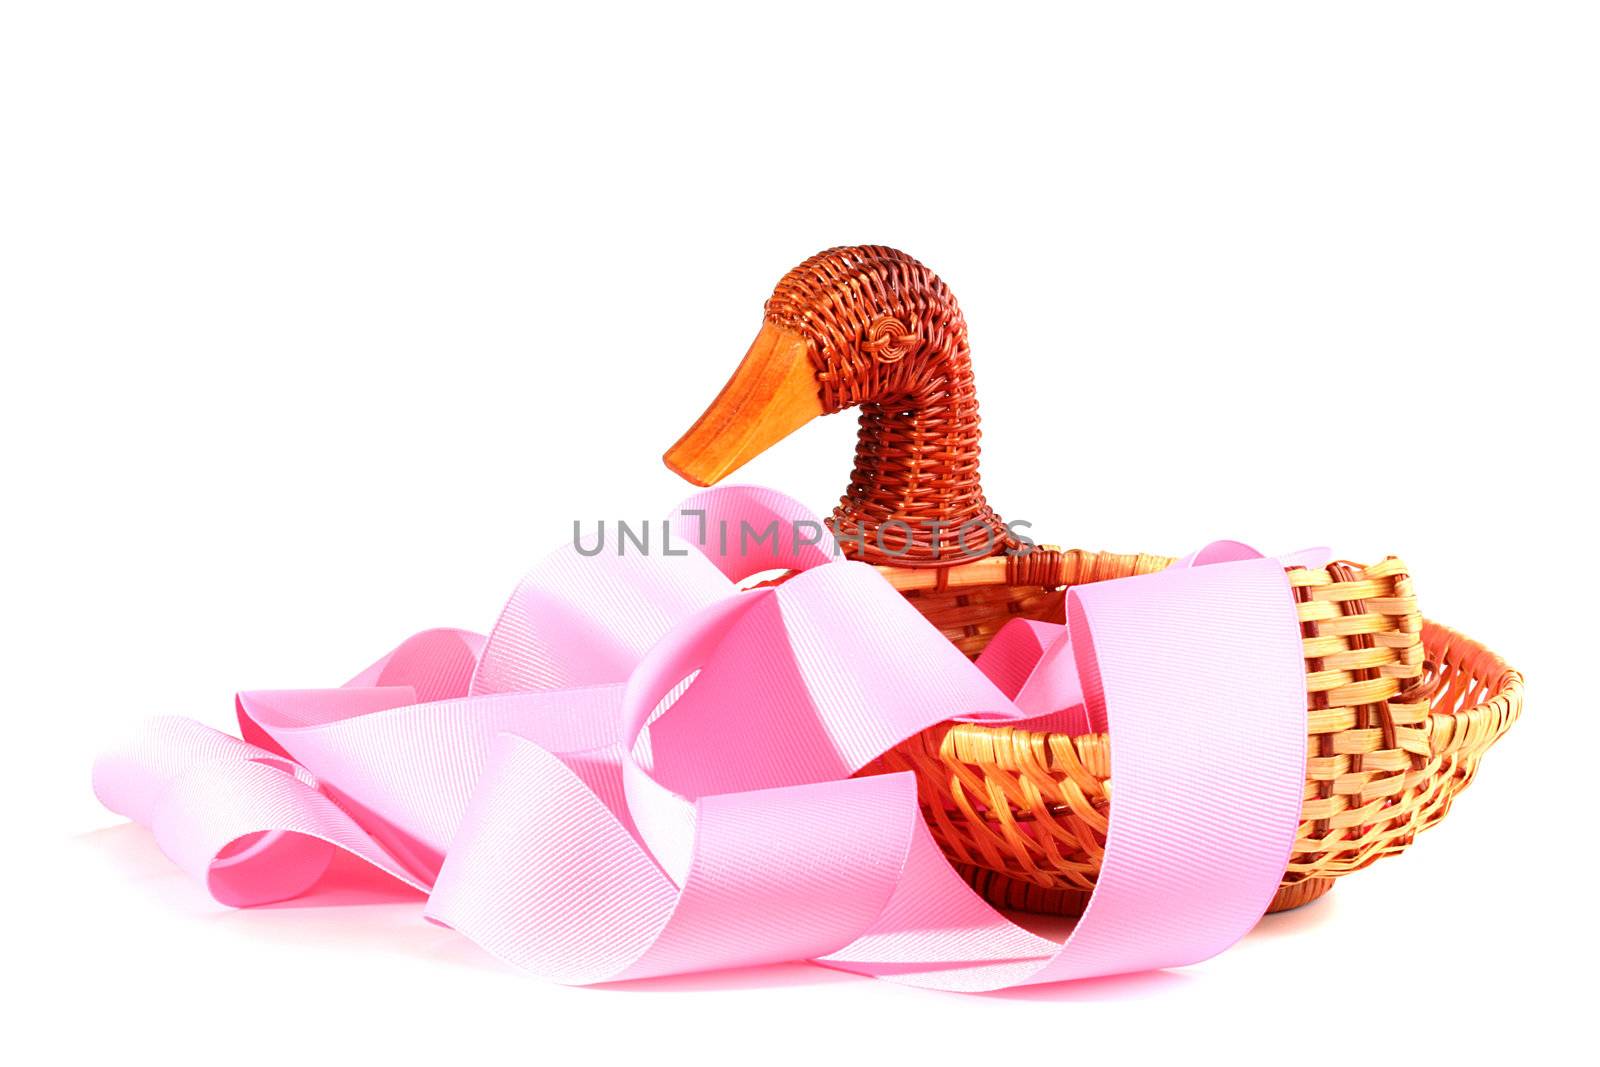 Decorative basket executed in the form of a duck with a pink celebratory tape.